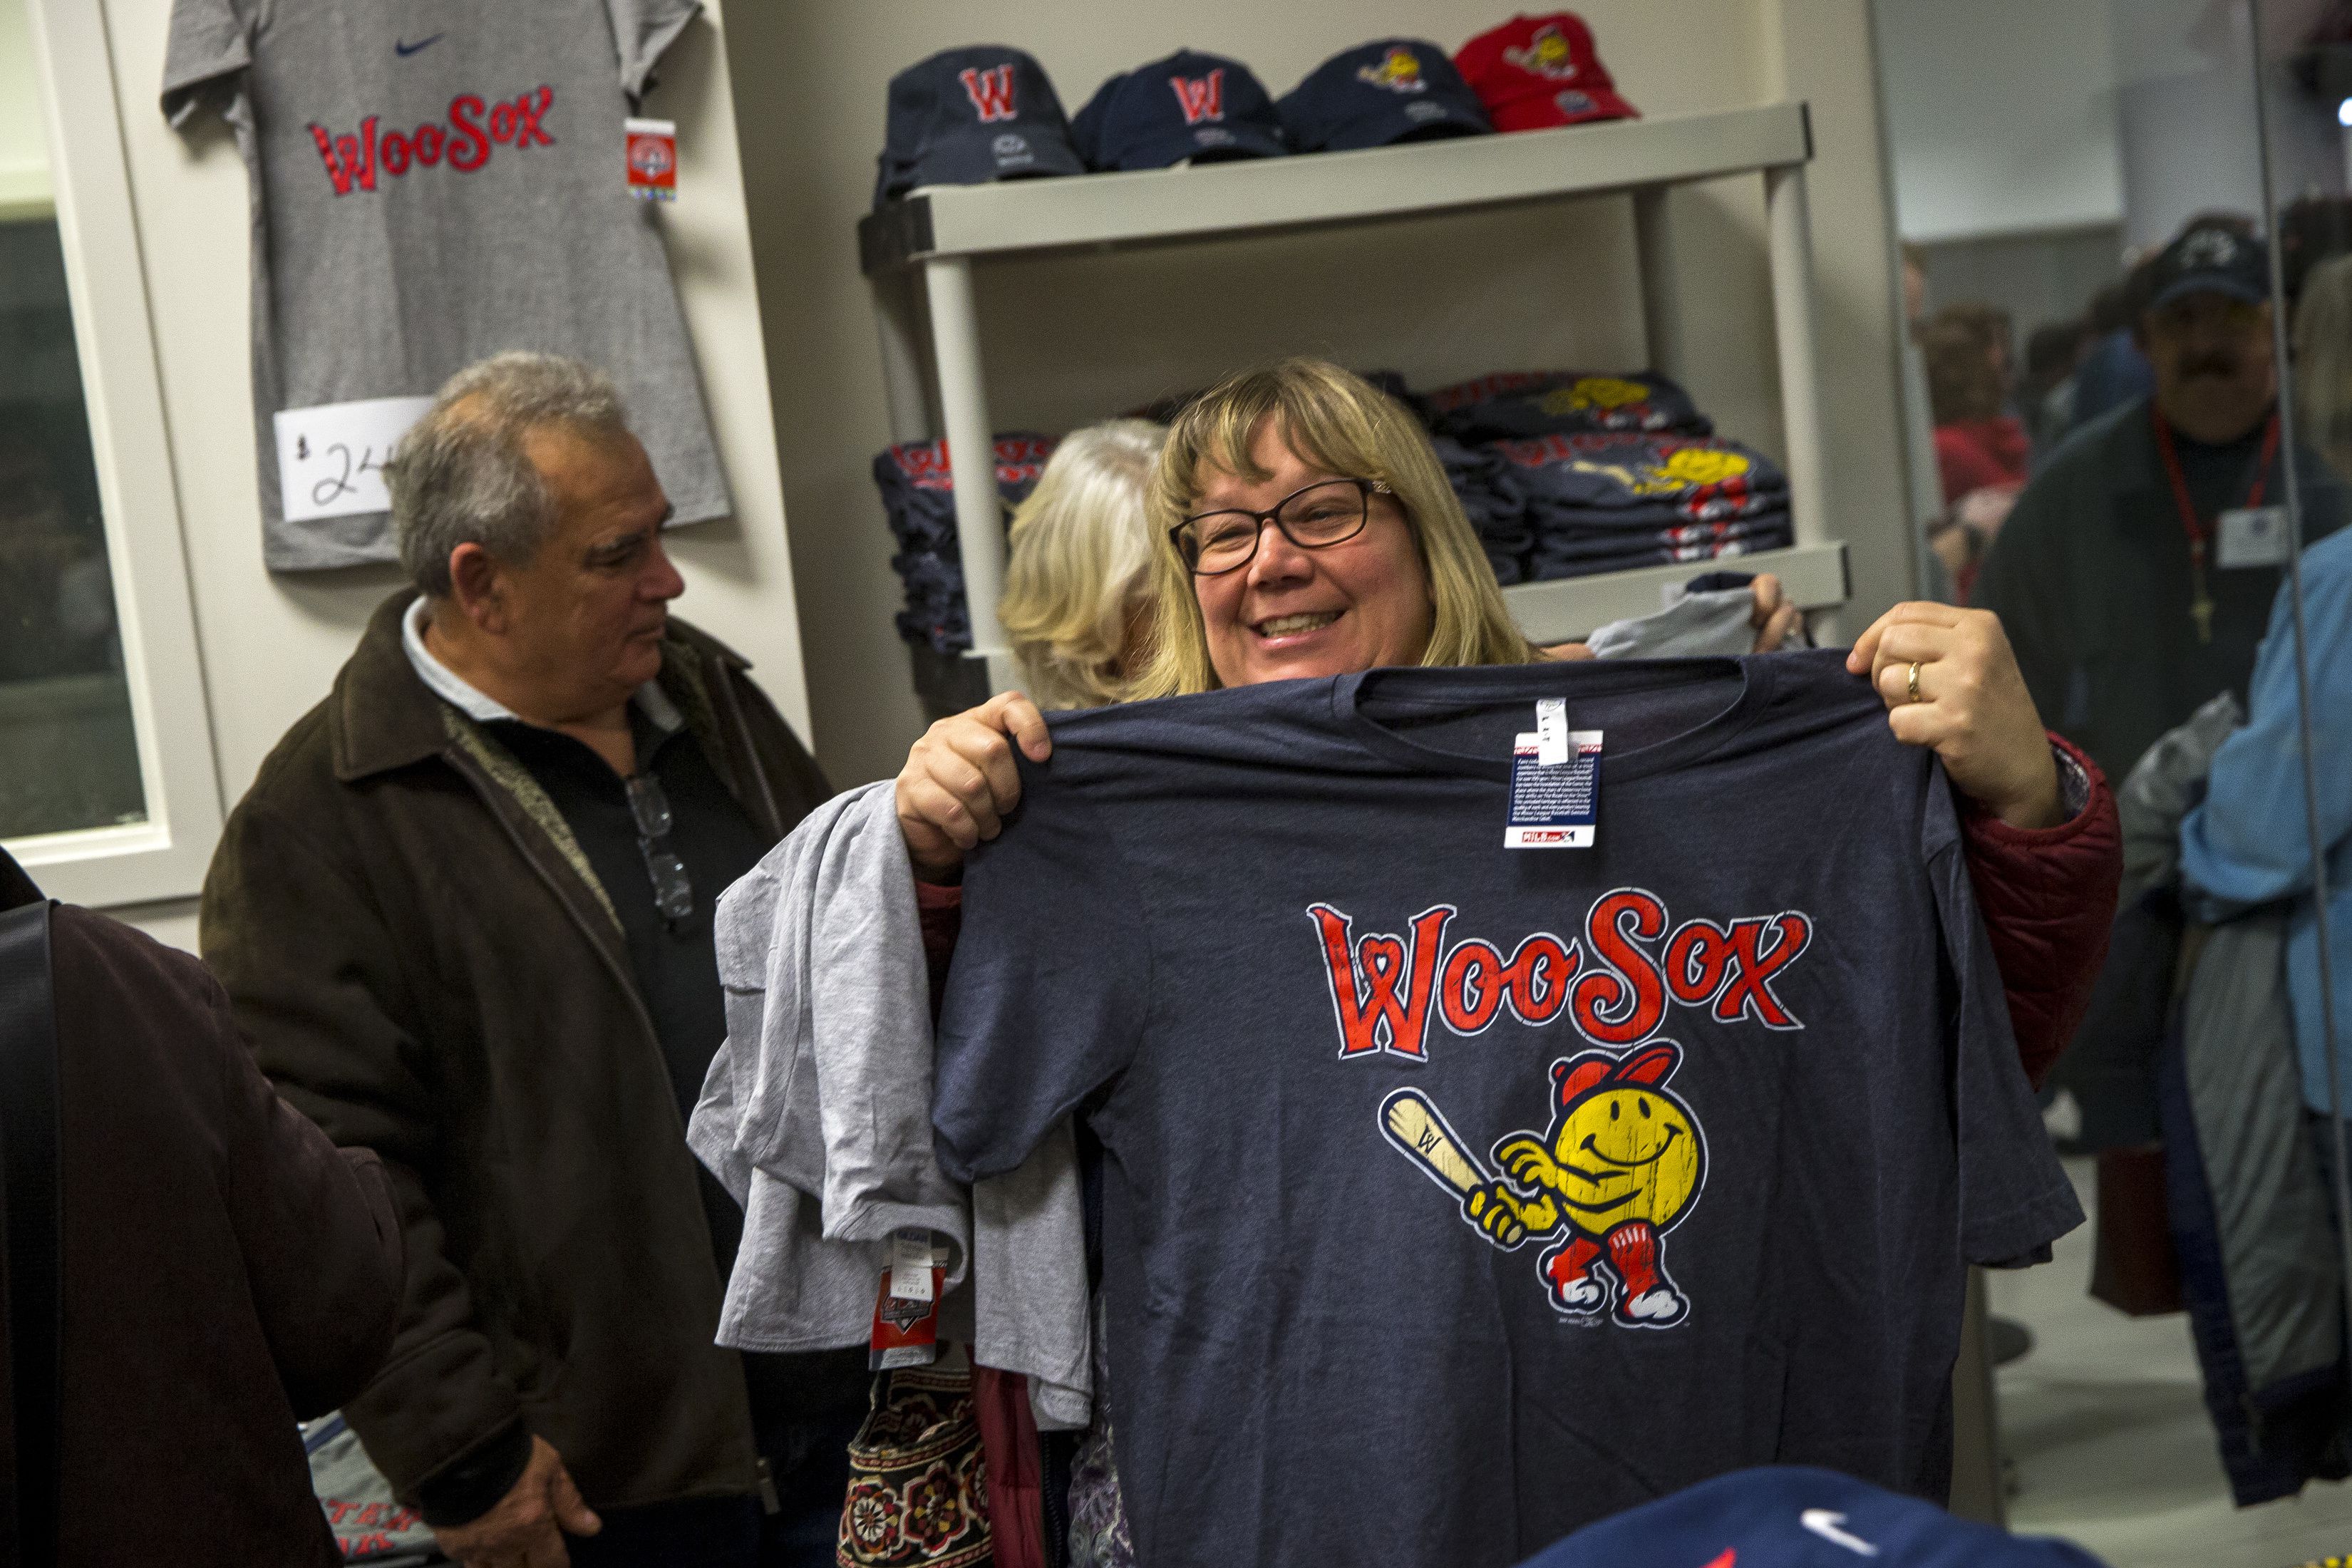 Worcester Red Sox reveal jerseys, hats: Here's what the WooSox